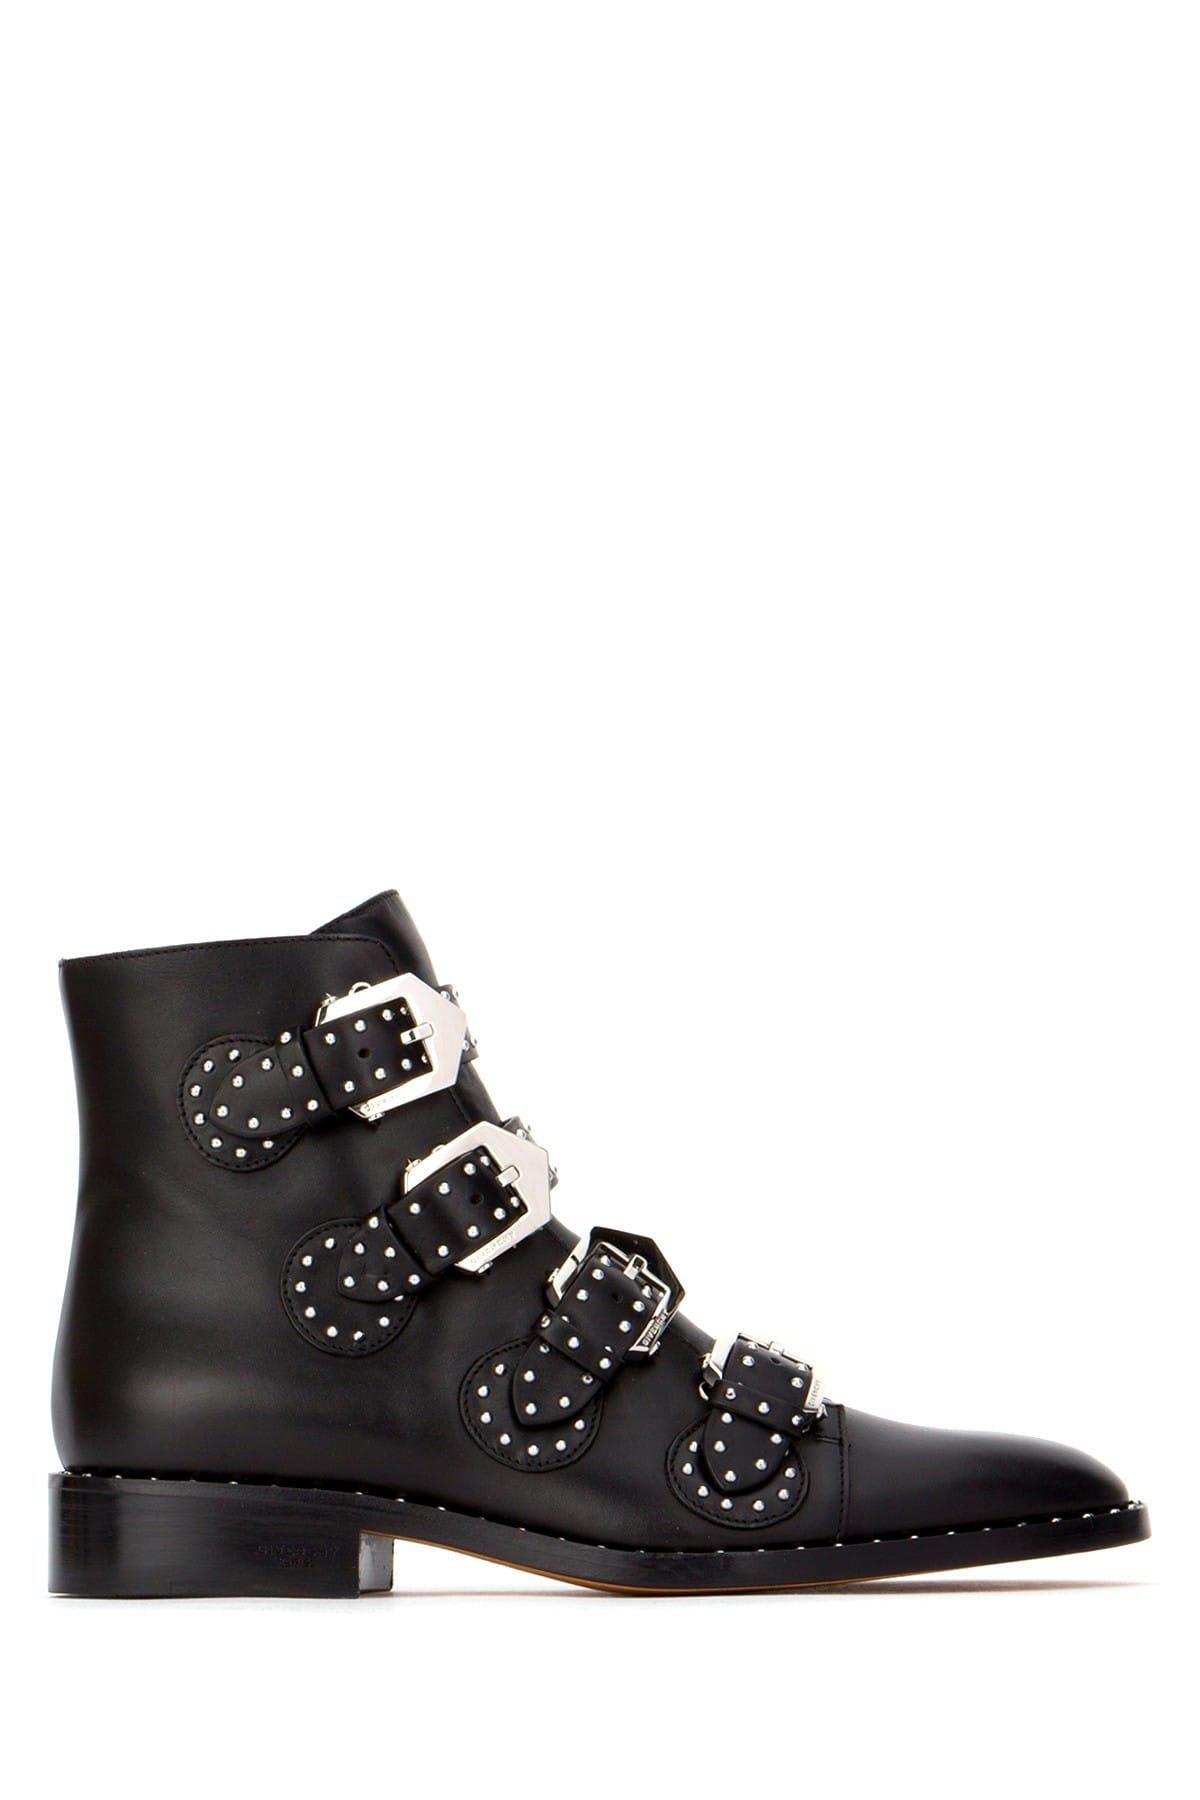 Shop Givenchy Black Leather Ankle Boots In Nero